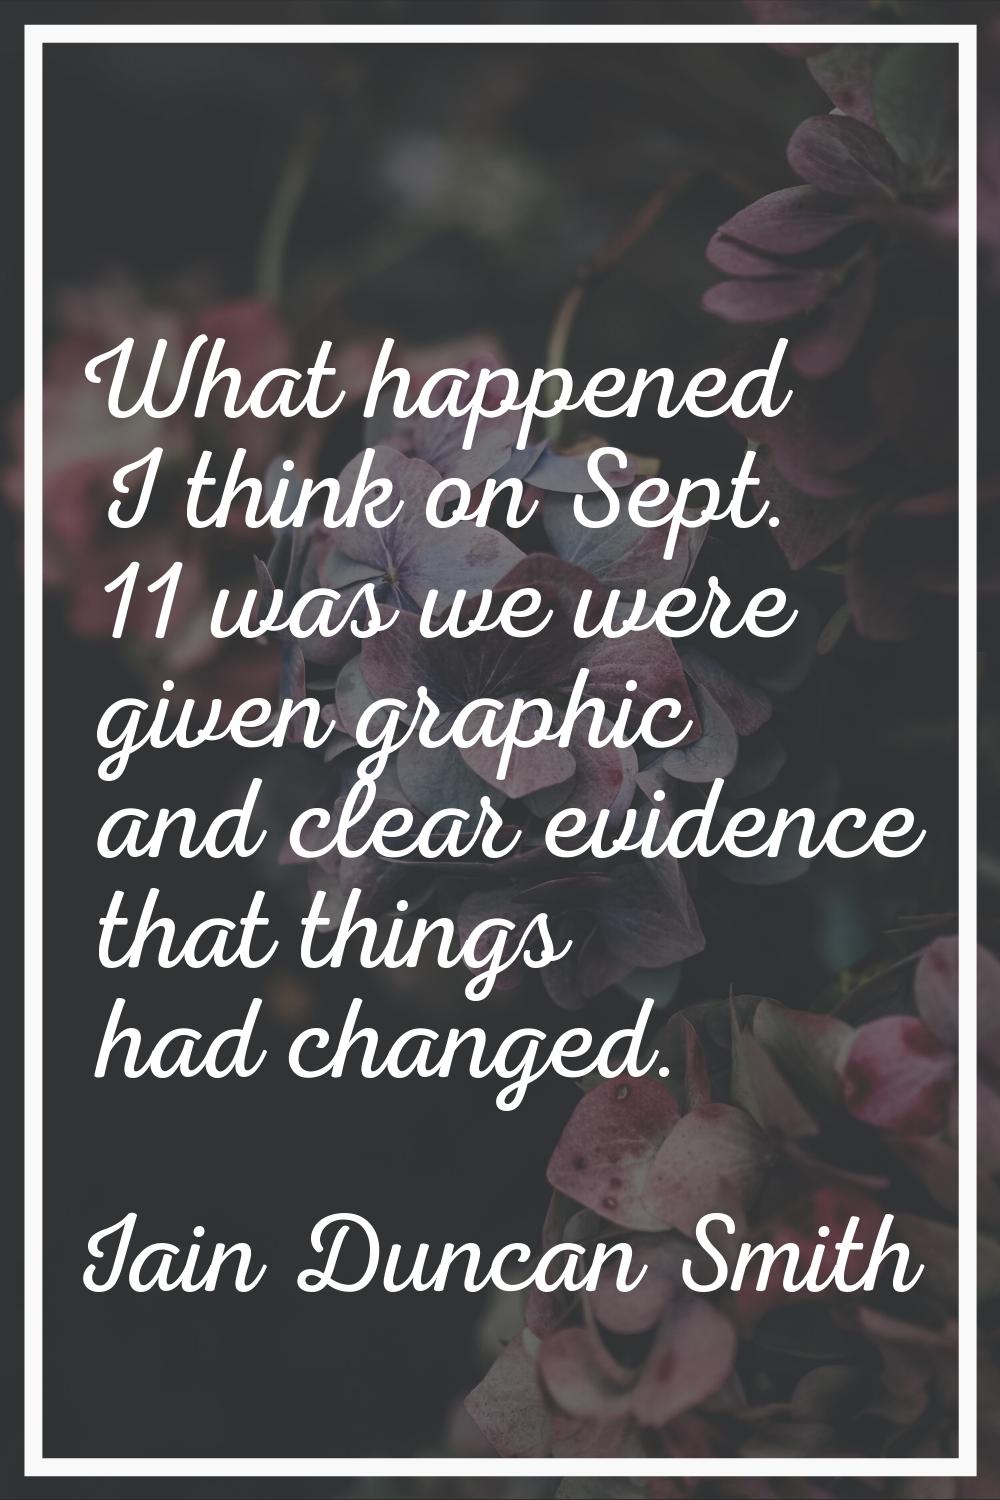 What happened I think on Sept. 11 was we were given graphic and clear evidence that things had chan